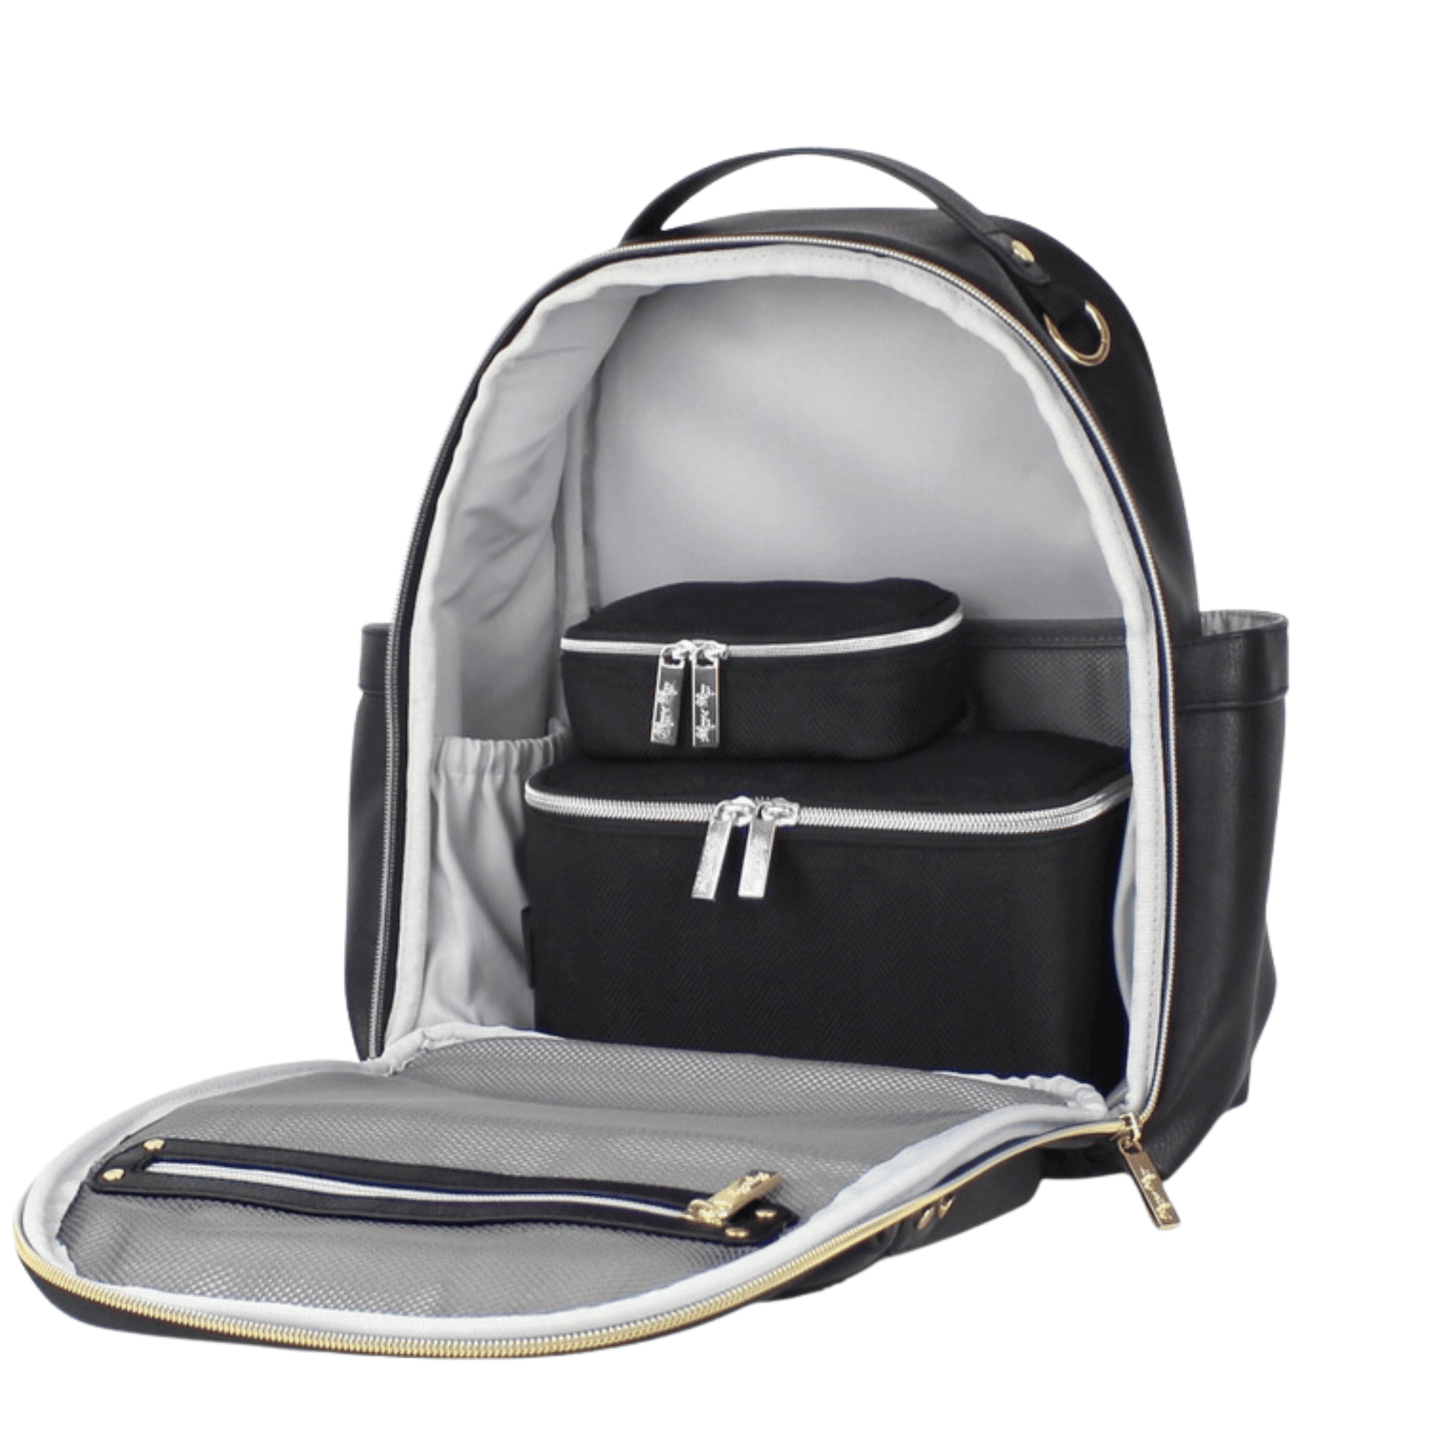 Itzy Ritzy Black and Silver Pack Like A Boss Packing Cubes & Travel Toiletries Bag